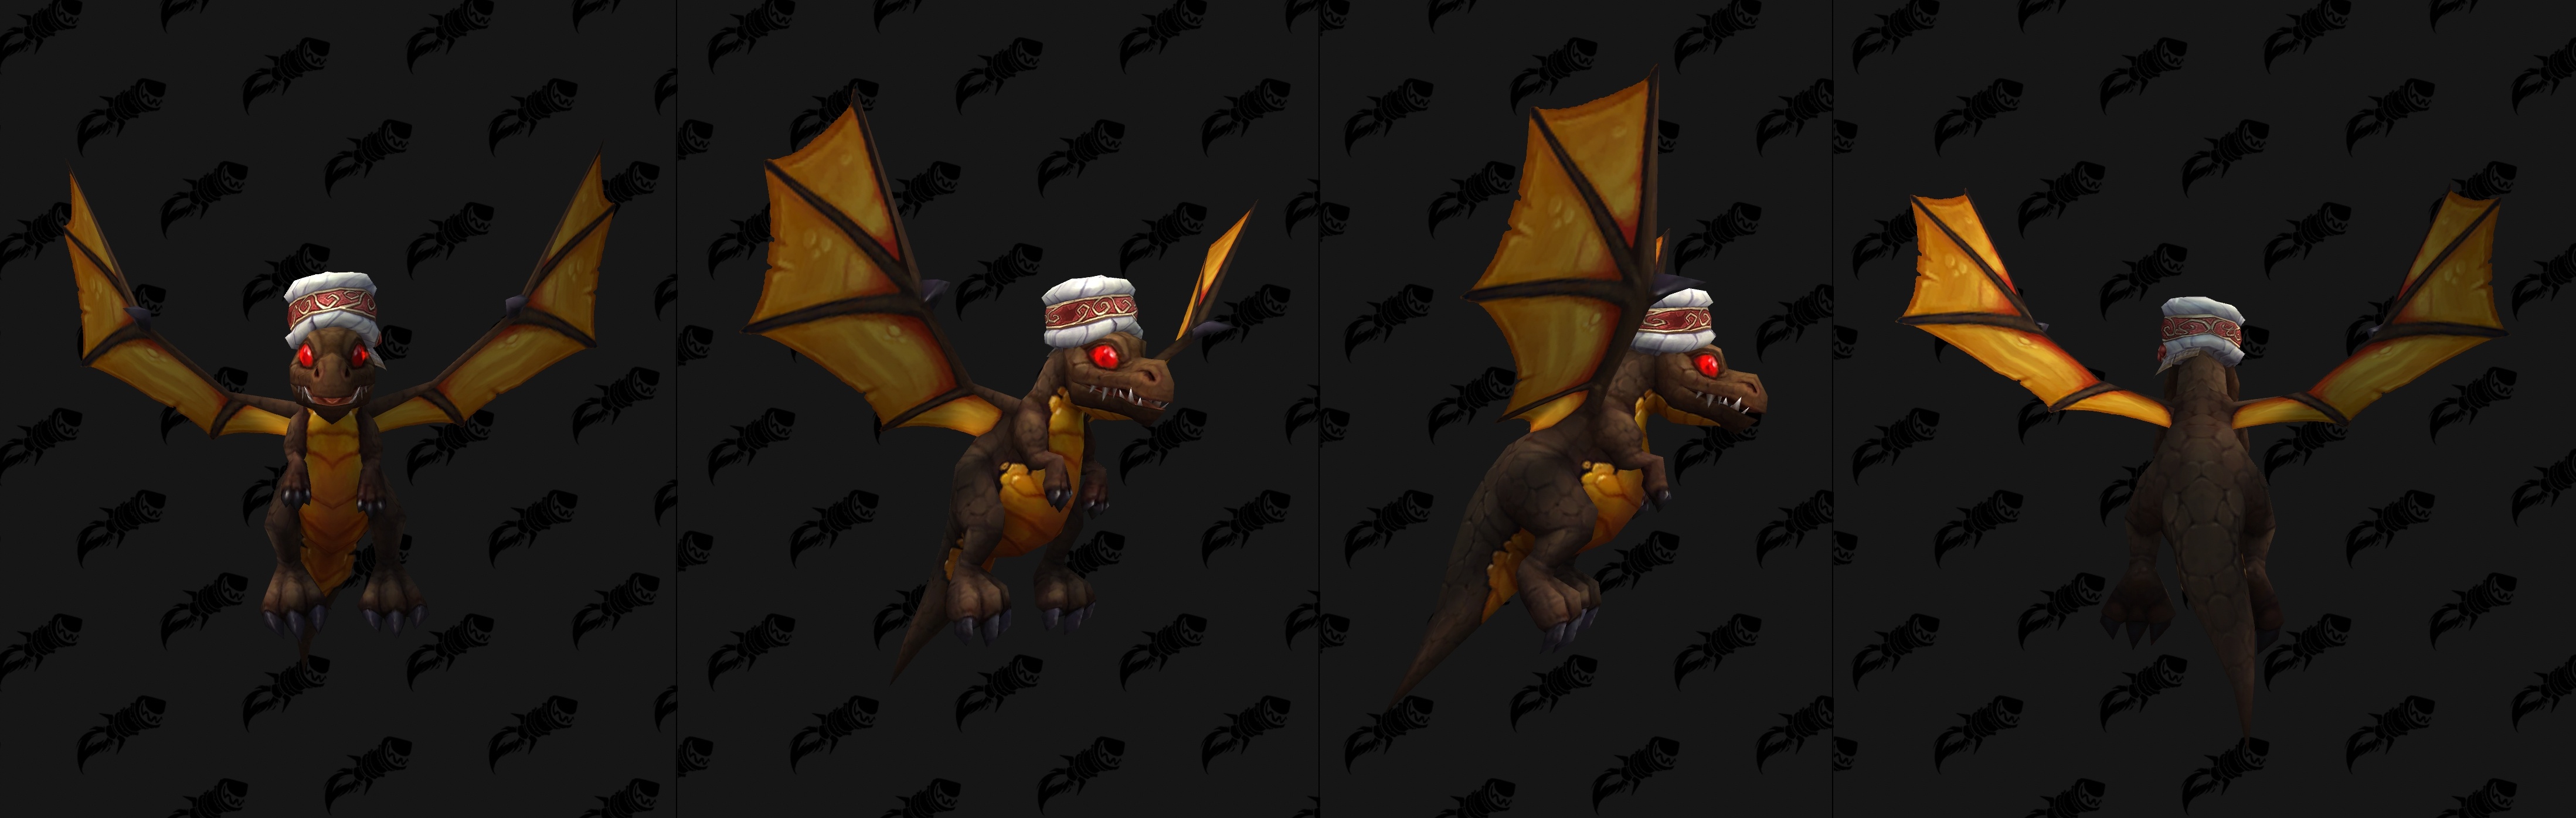 Cataclysm Classic Upgrades Available in the Shop - Wowhead News